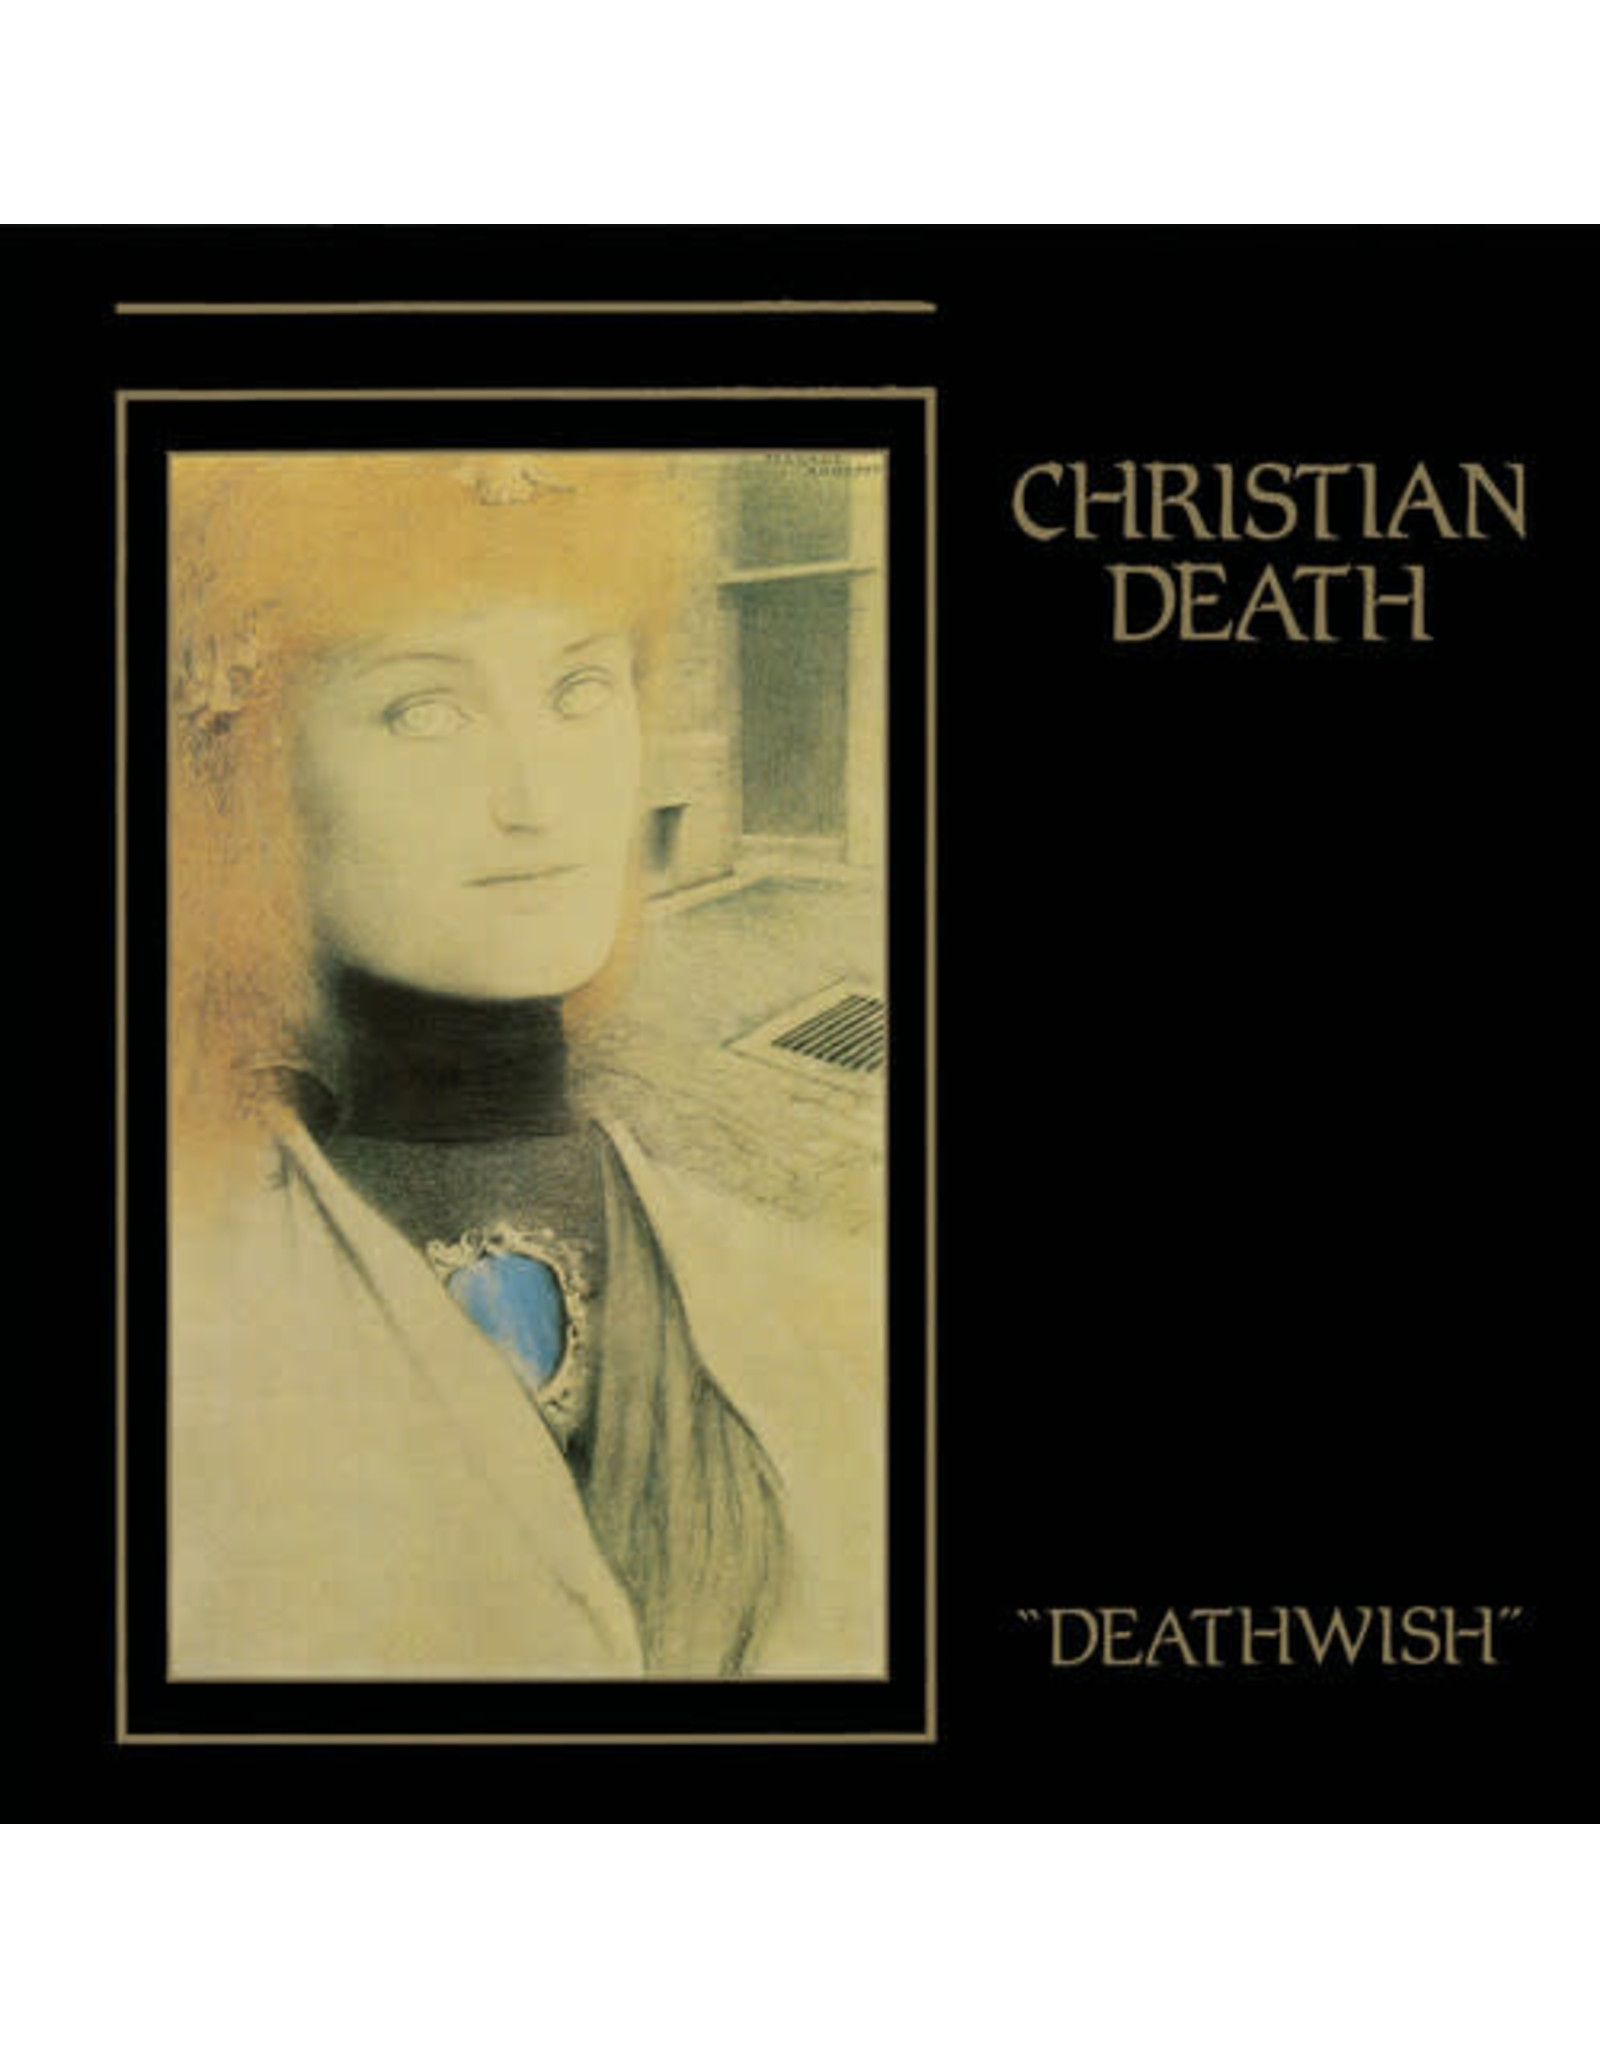 New Vinyl Christian Death - Deathwish (Red & Gold Splatter, Deluxe Edition, Limited Edition) LP